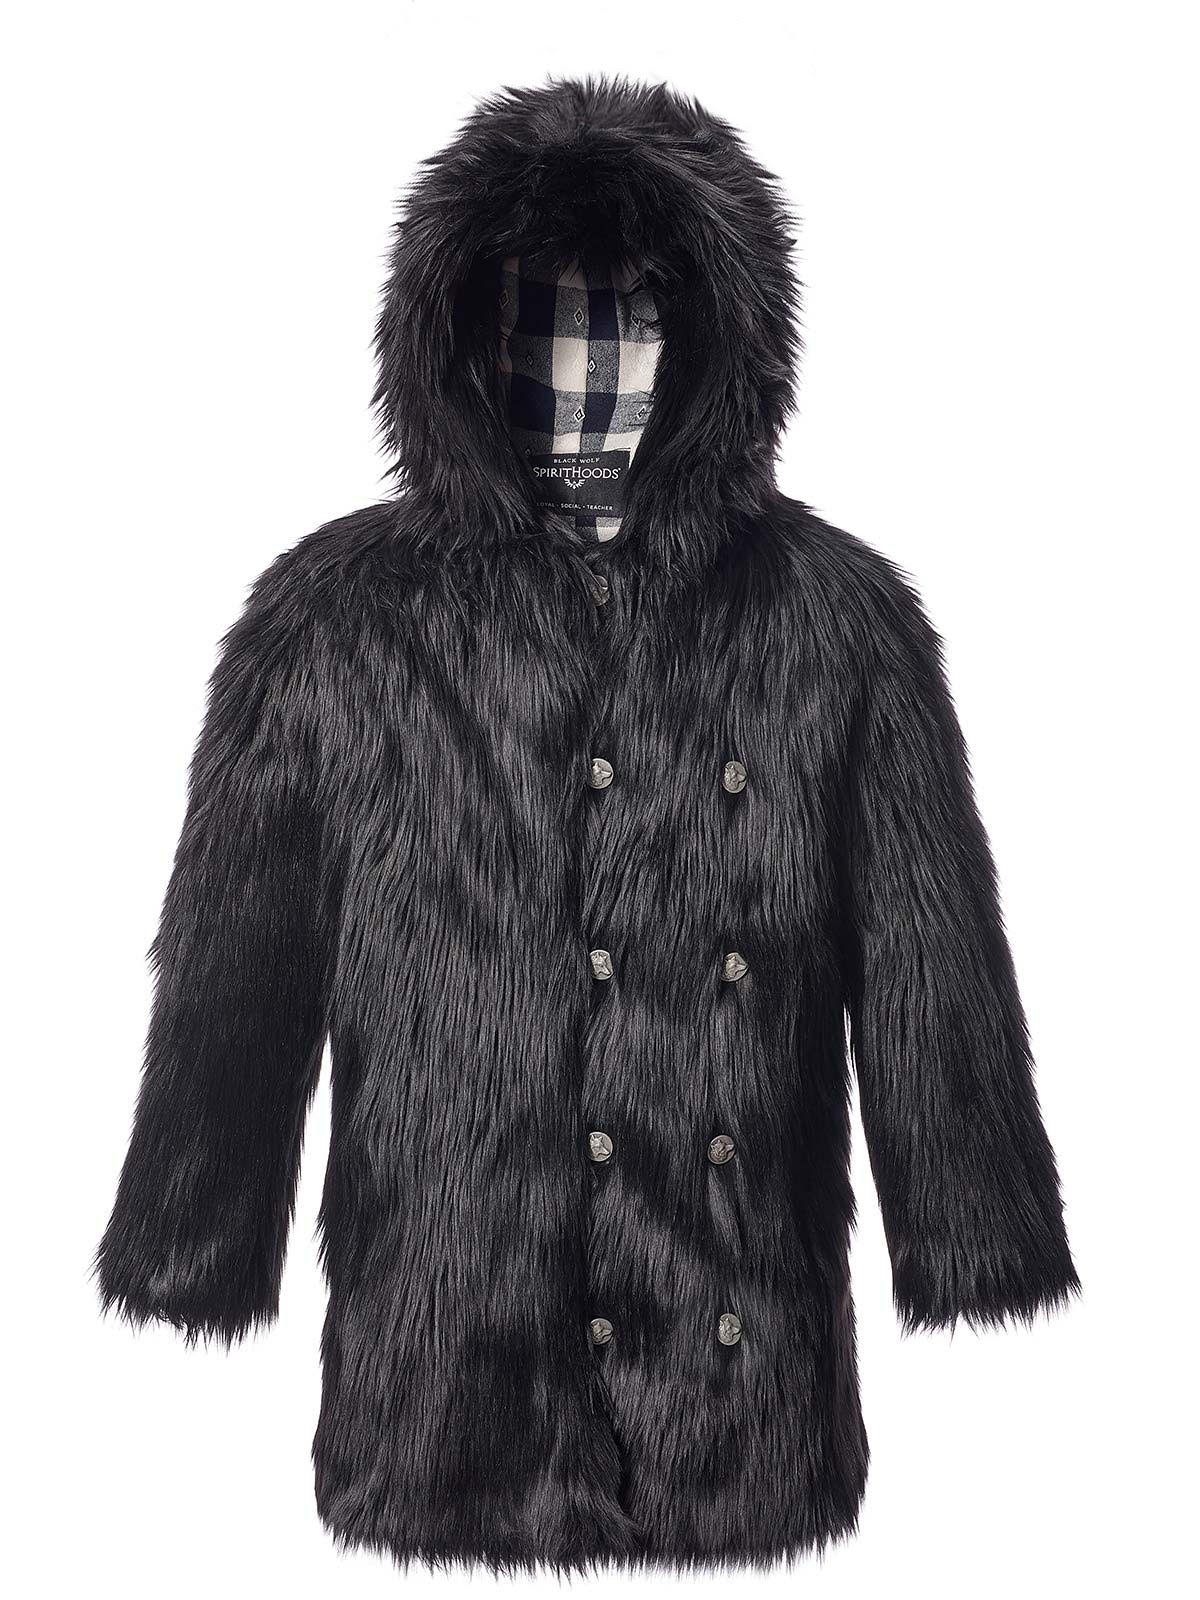 Exterior and Interior View of Black Wolf Faux Fur Hooded Coat with Plaid Lining